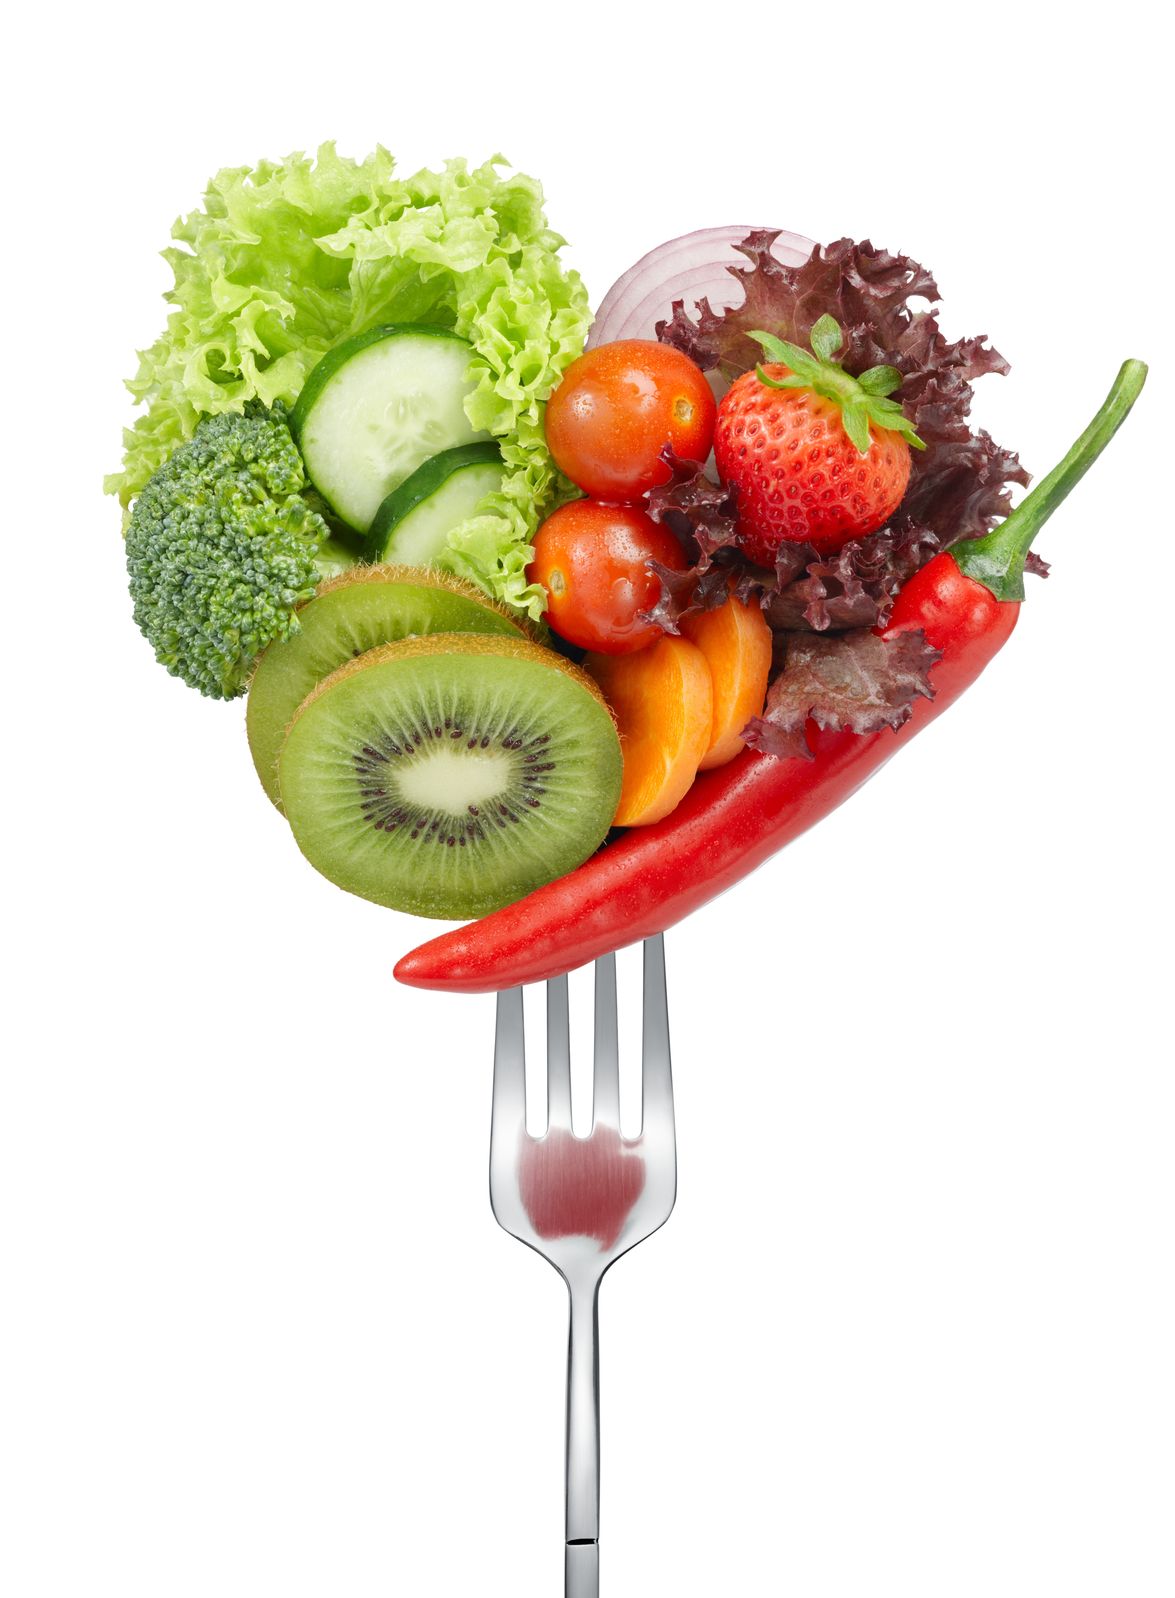 Do Your Heart a Favor - Eat Right and Exercise! Veggies on a fork